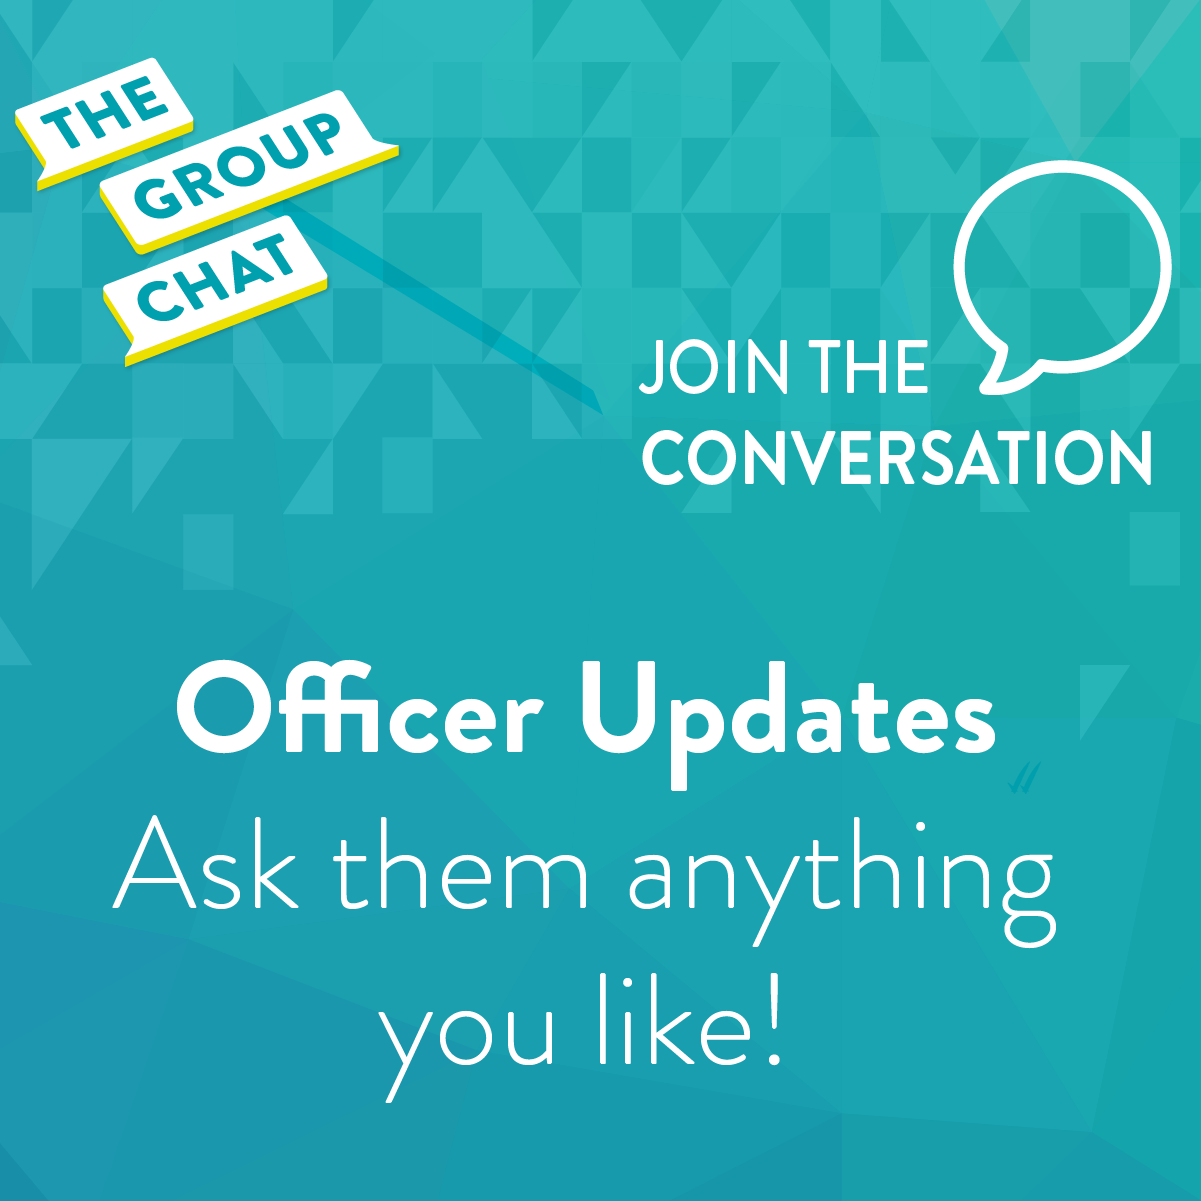 Officer updates - ask them anything you like!